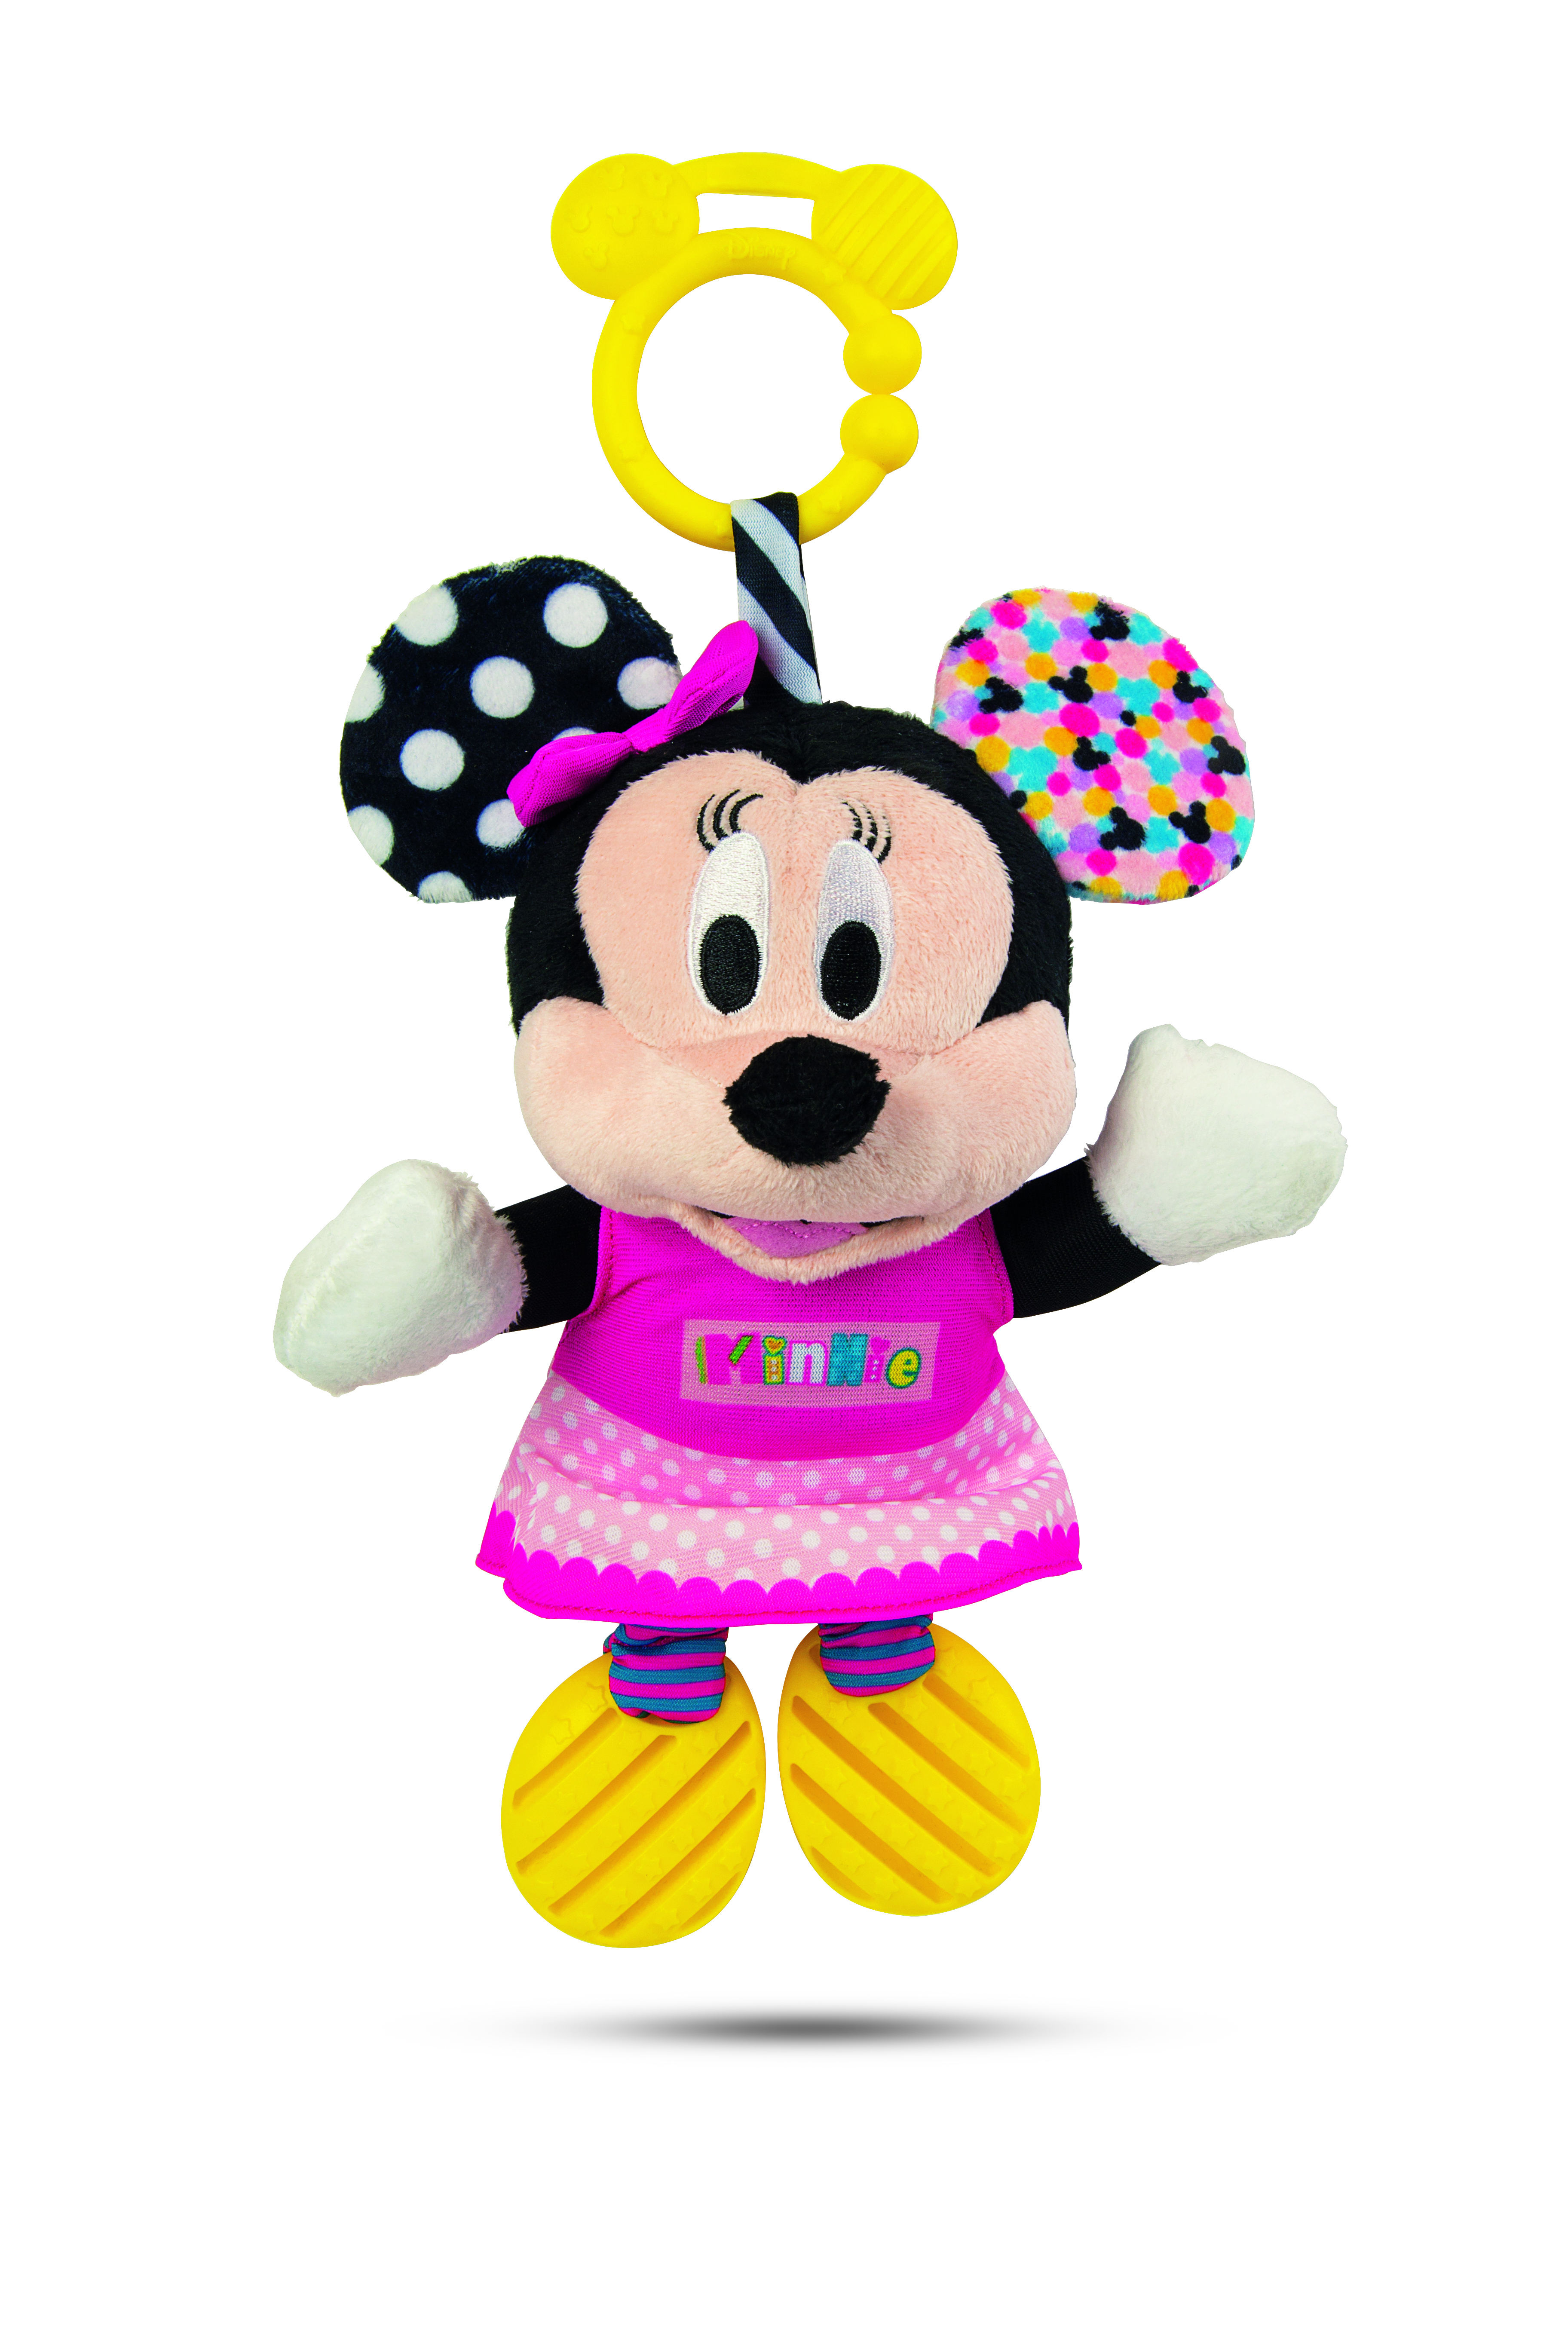 Clementoni Baby Minnie First Activities